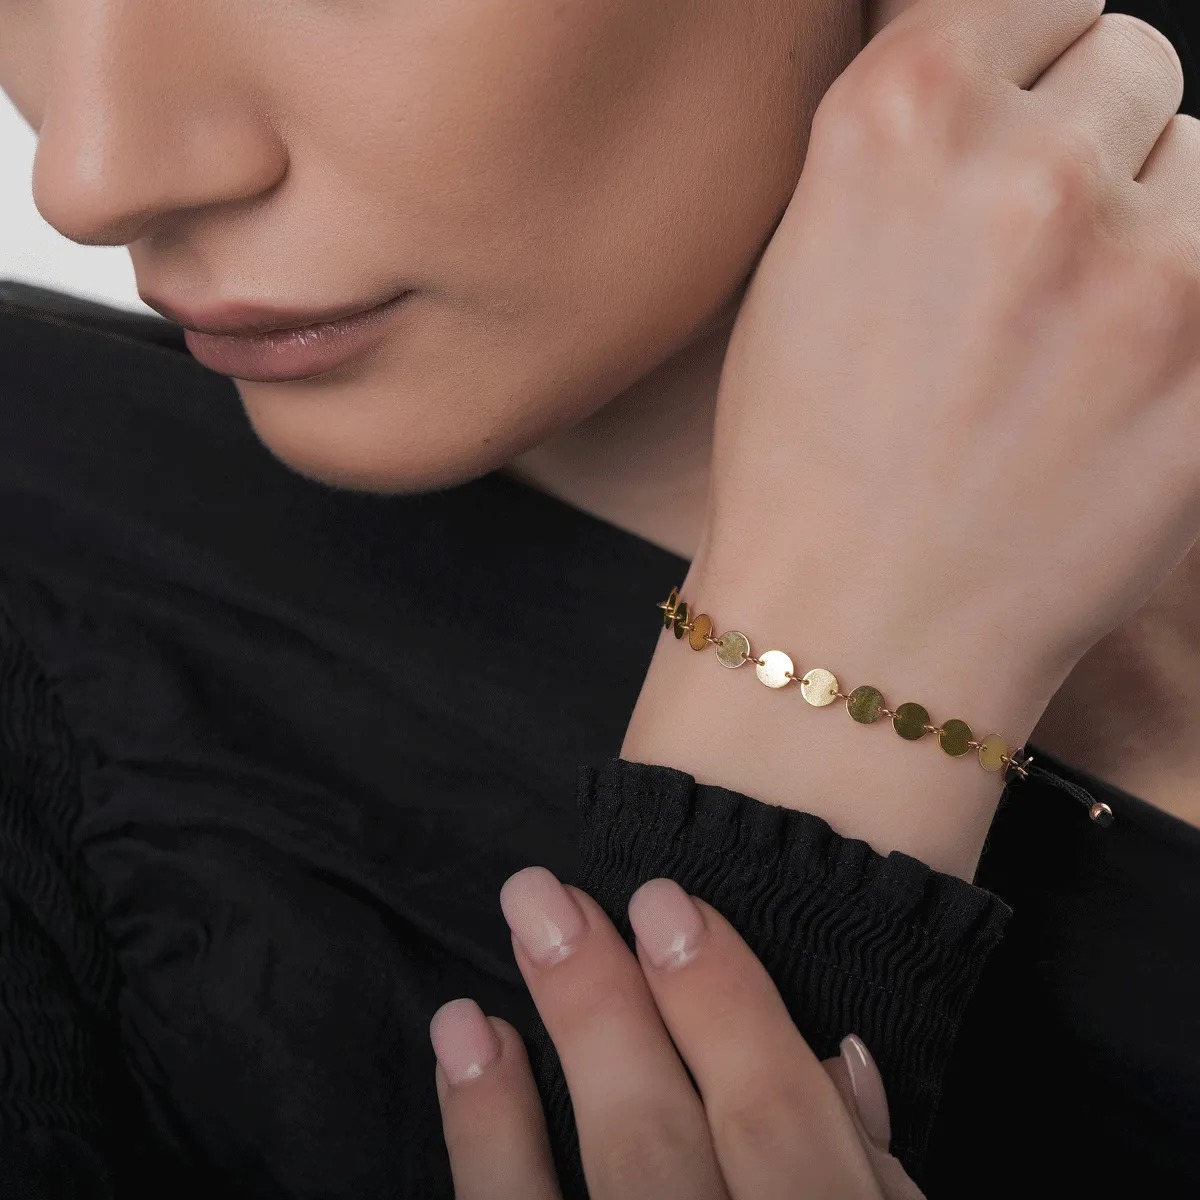 Black cord bracelet with 14K yellow gold